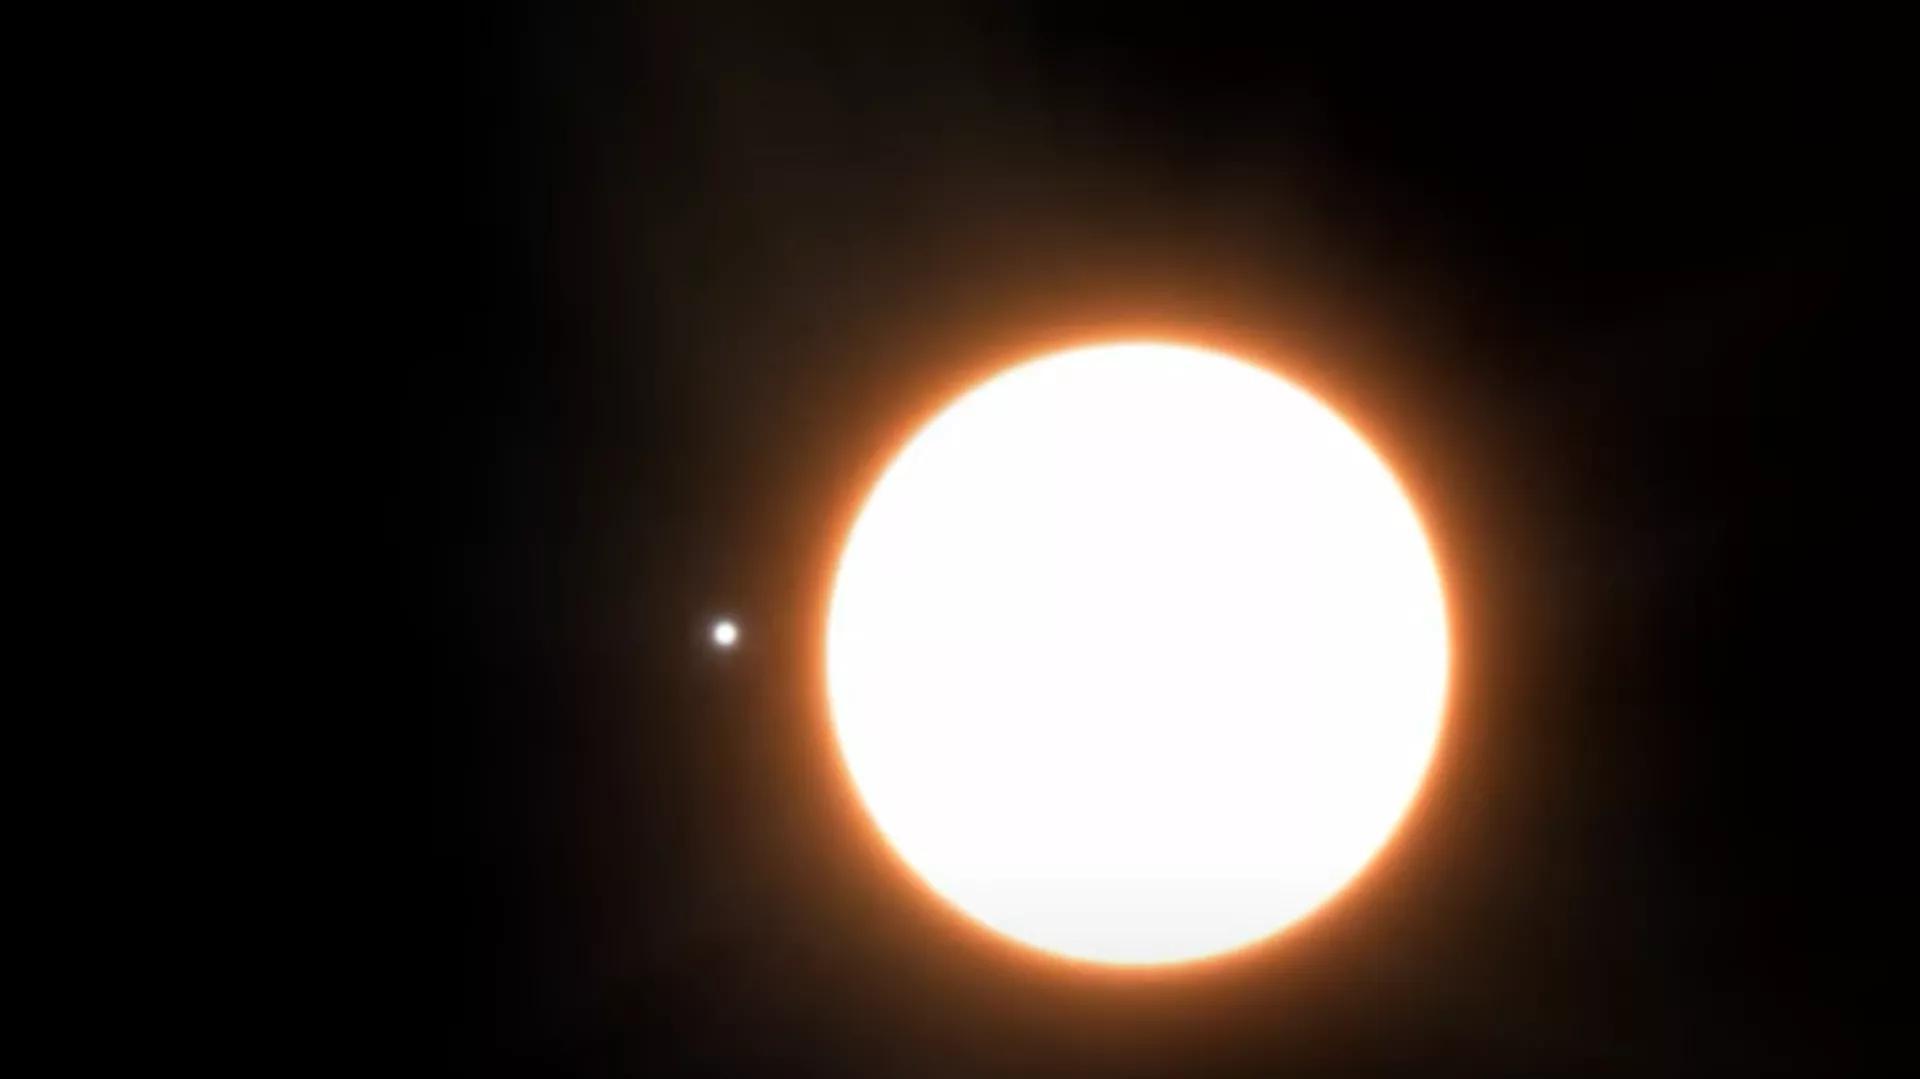 Astronomers Discover Shiniest Exoplanet With Reflective Metal Clouds